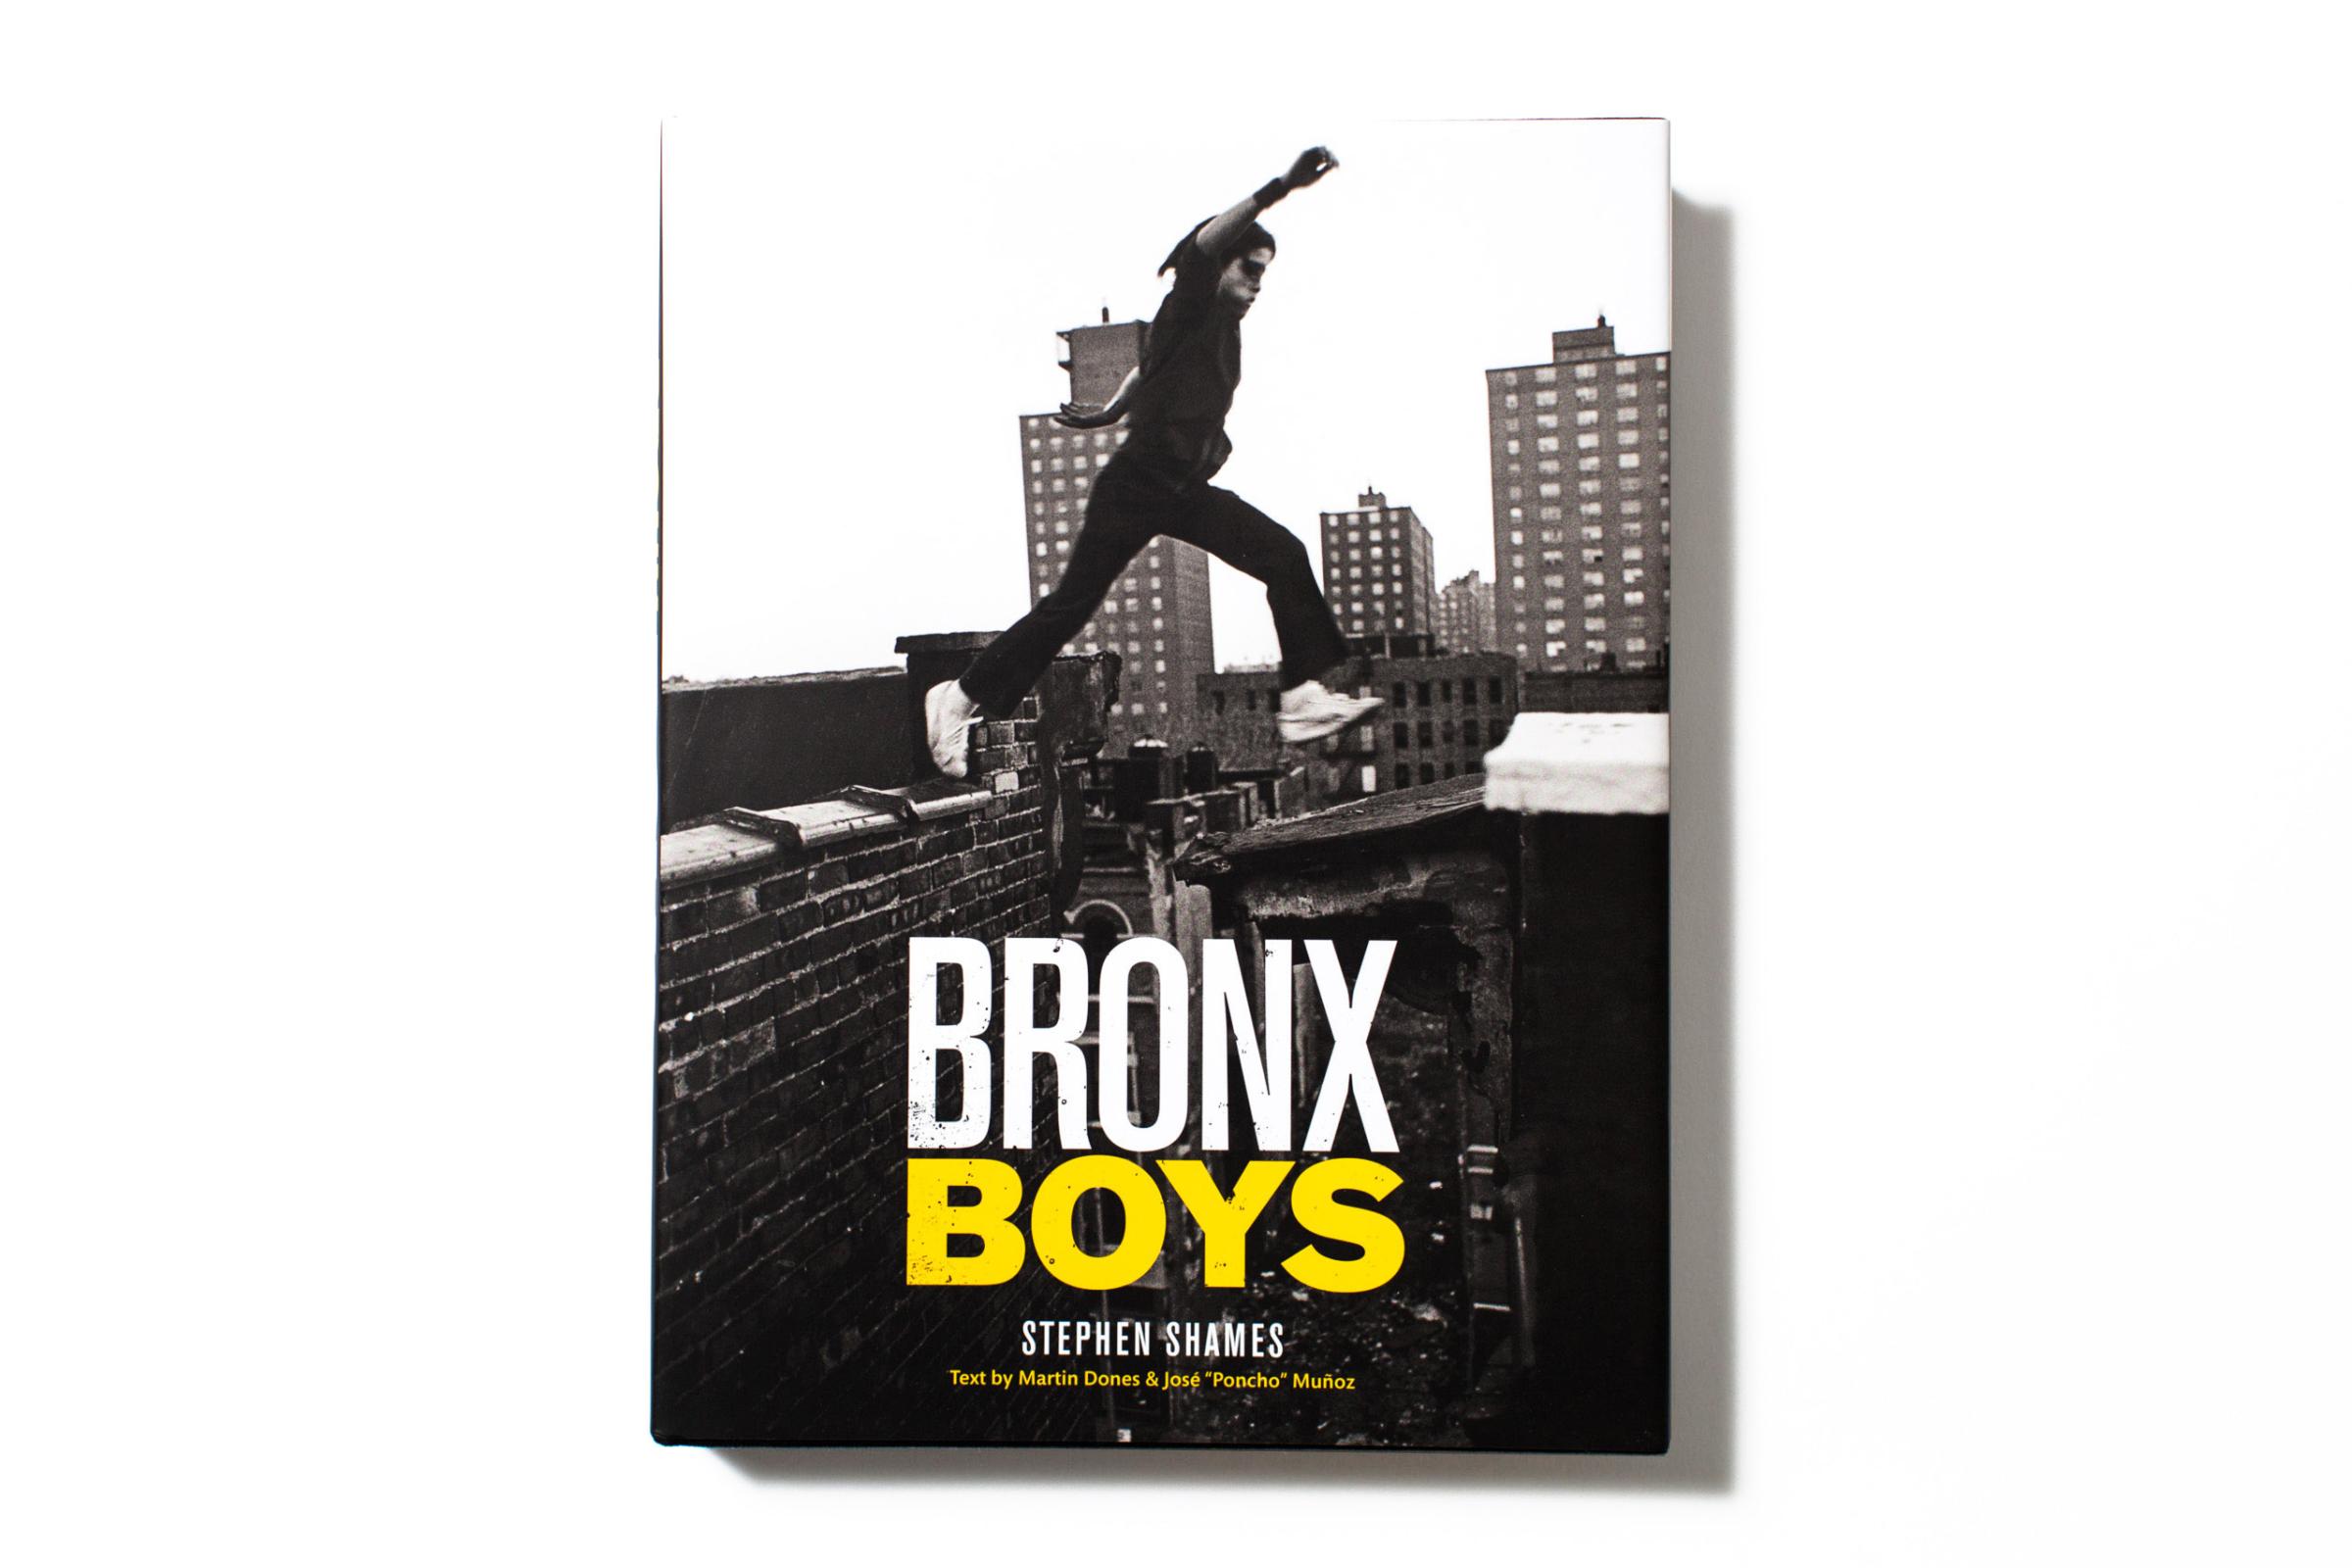 Bronx Boys byStephen Shames, published byUniversity of Texas Press, selected by Vince Aletti, photography critic, The New Yorker.